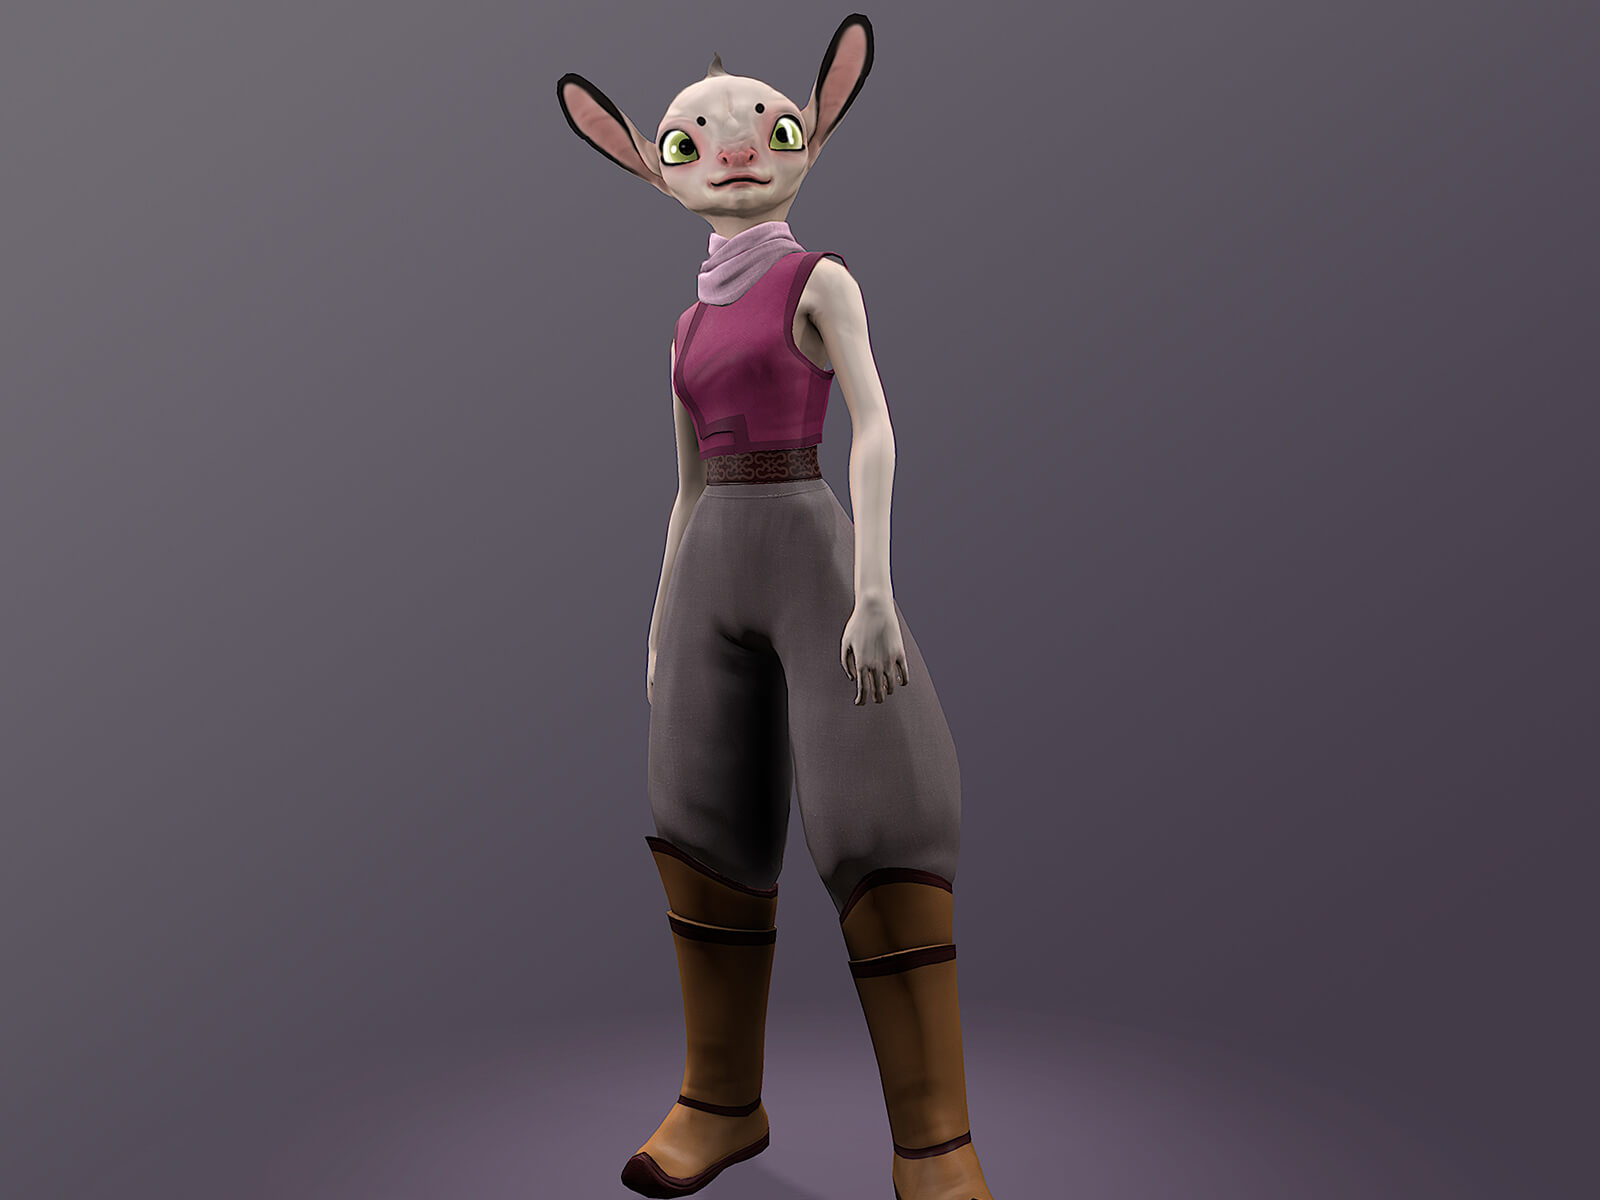 computer-generated 3D model of a character with a human body and vaguely cat-like face, with big ears and eyes